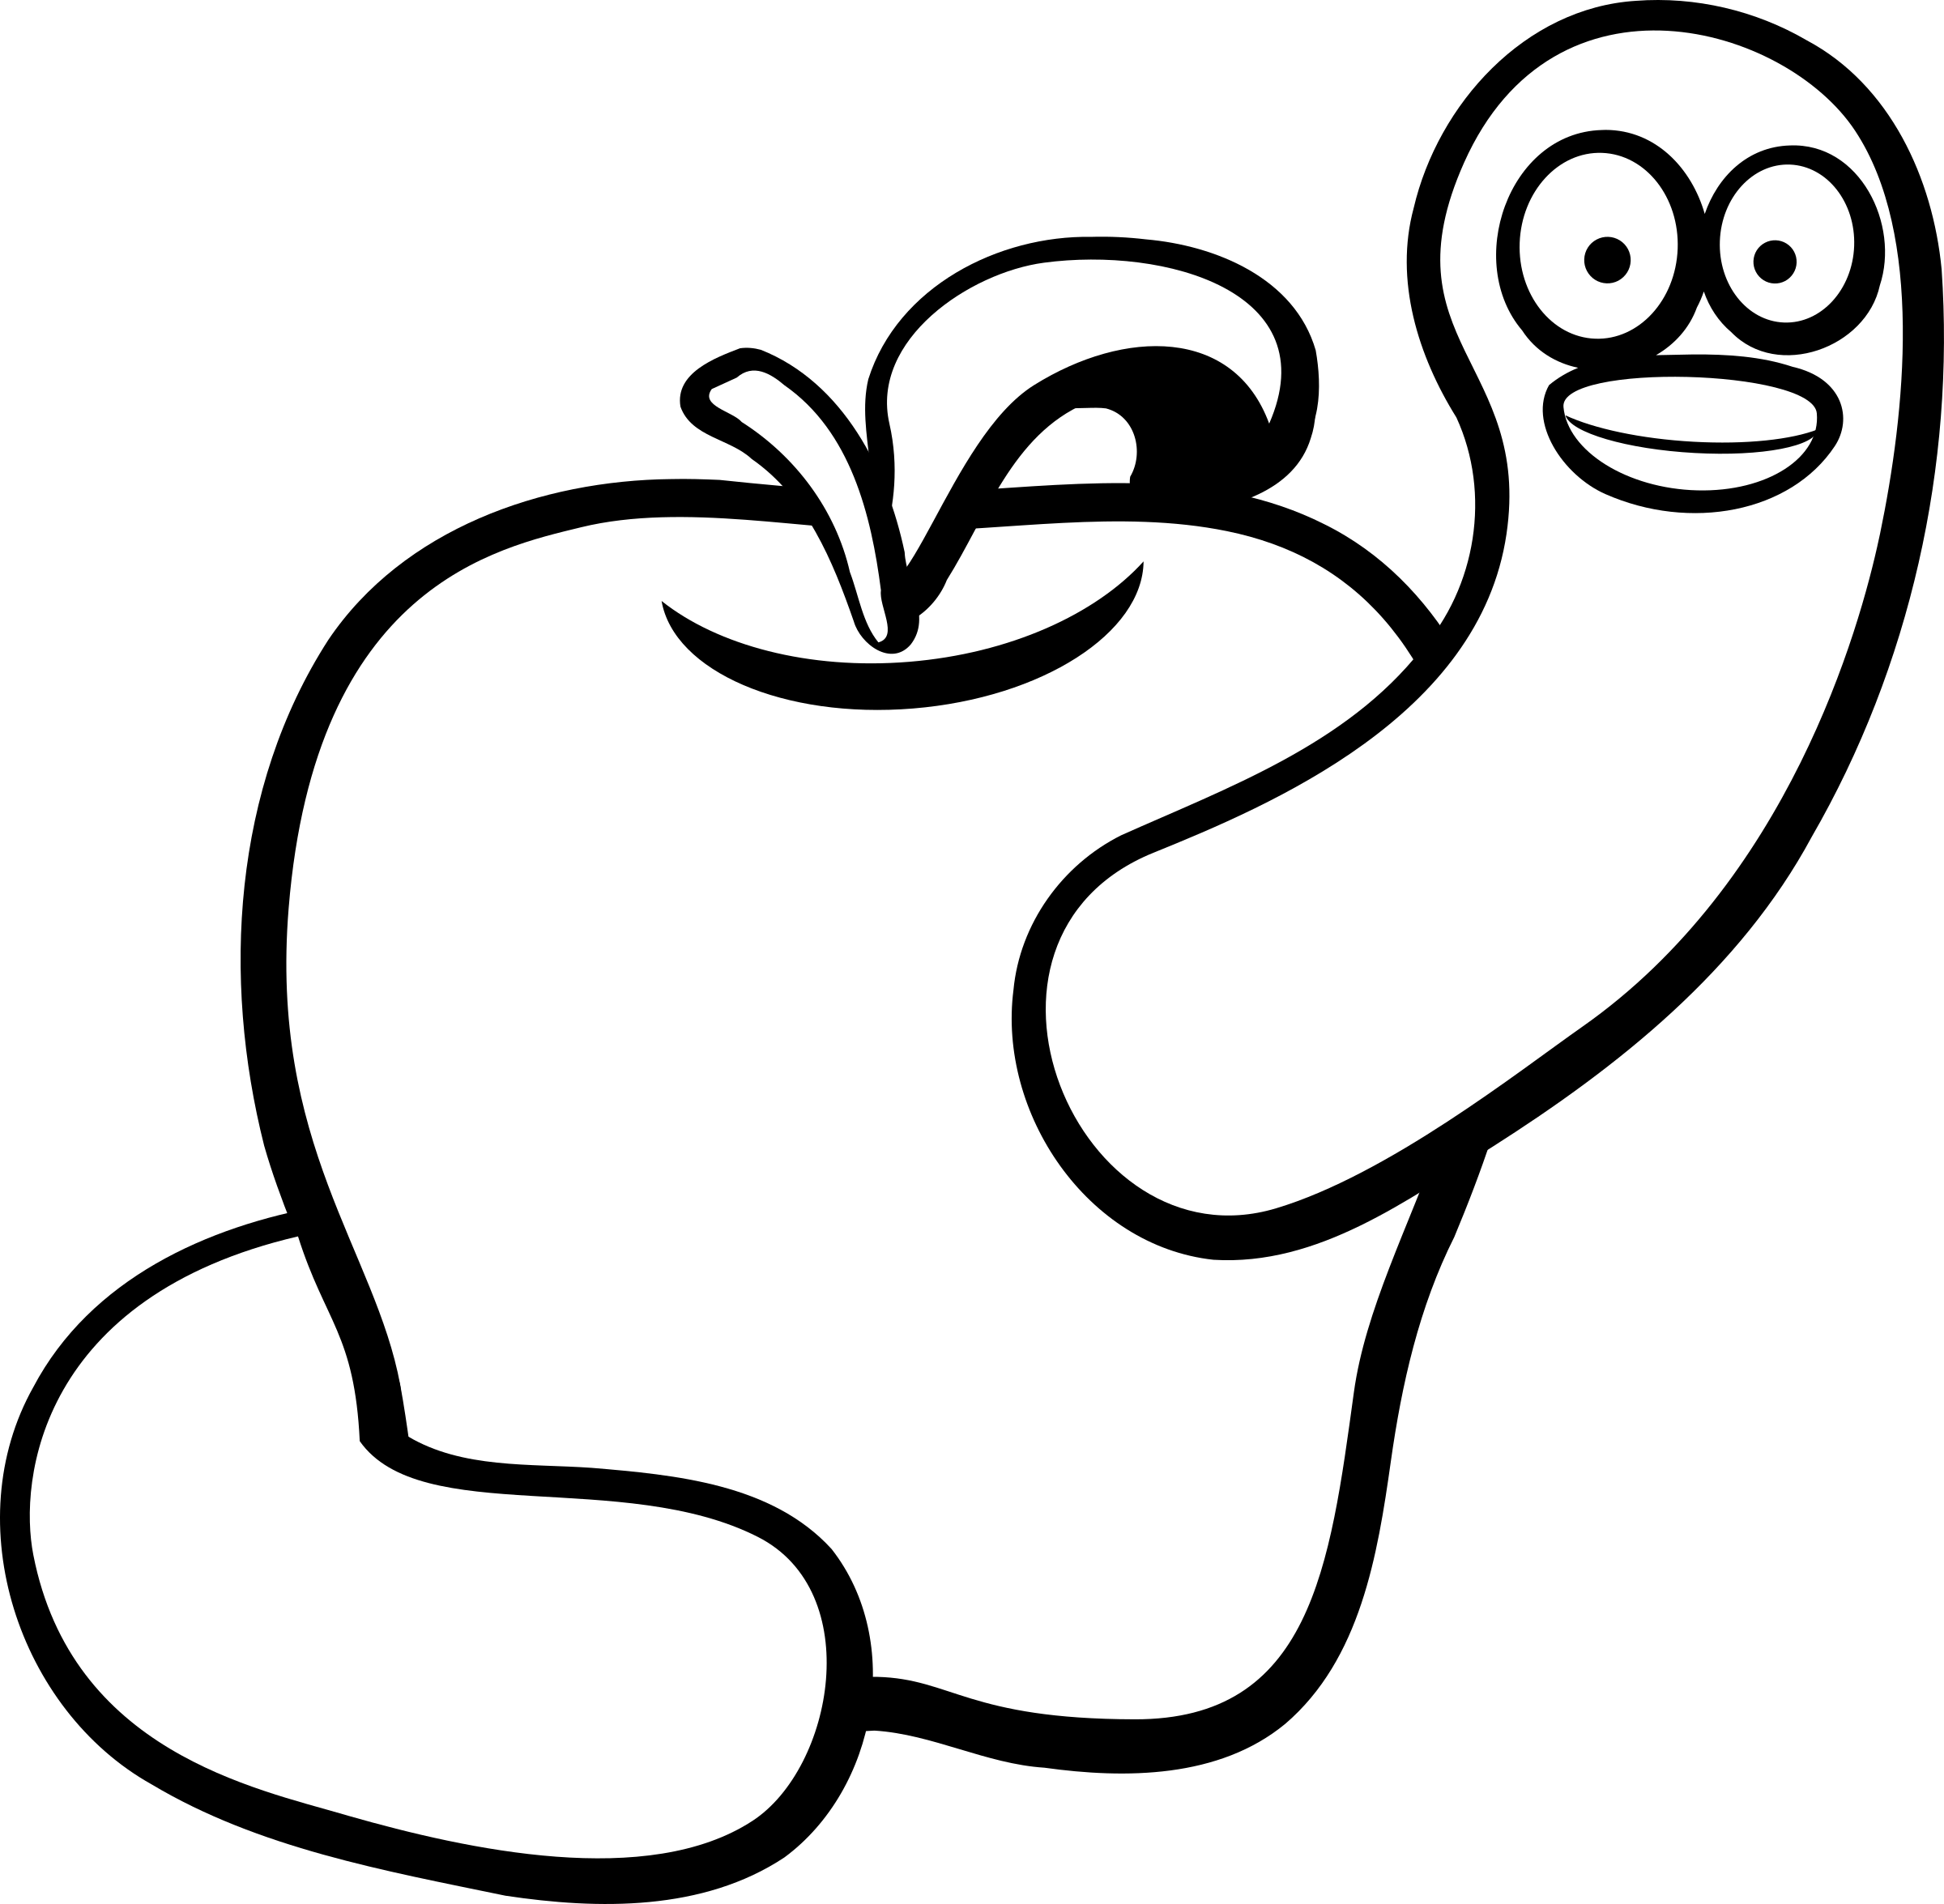 Worm clipart business. Apple line drawing at